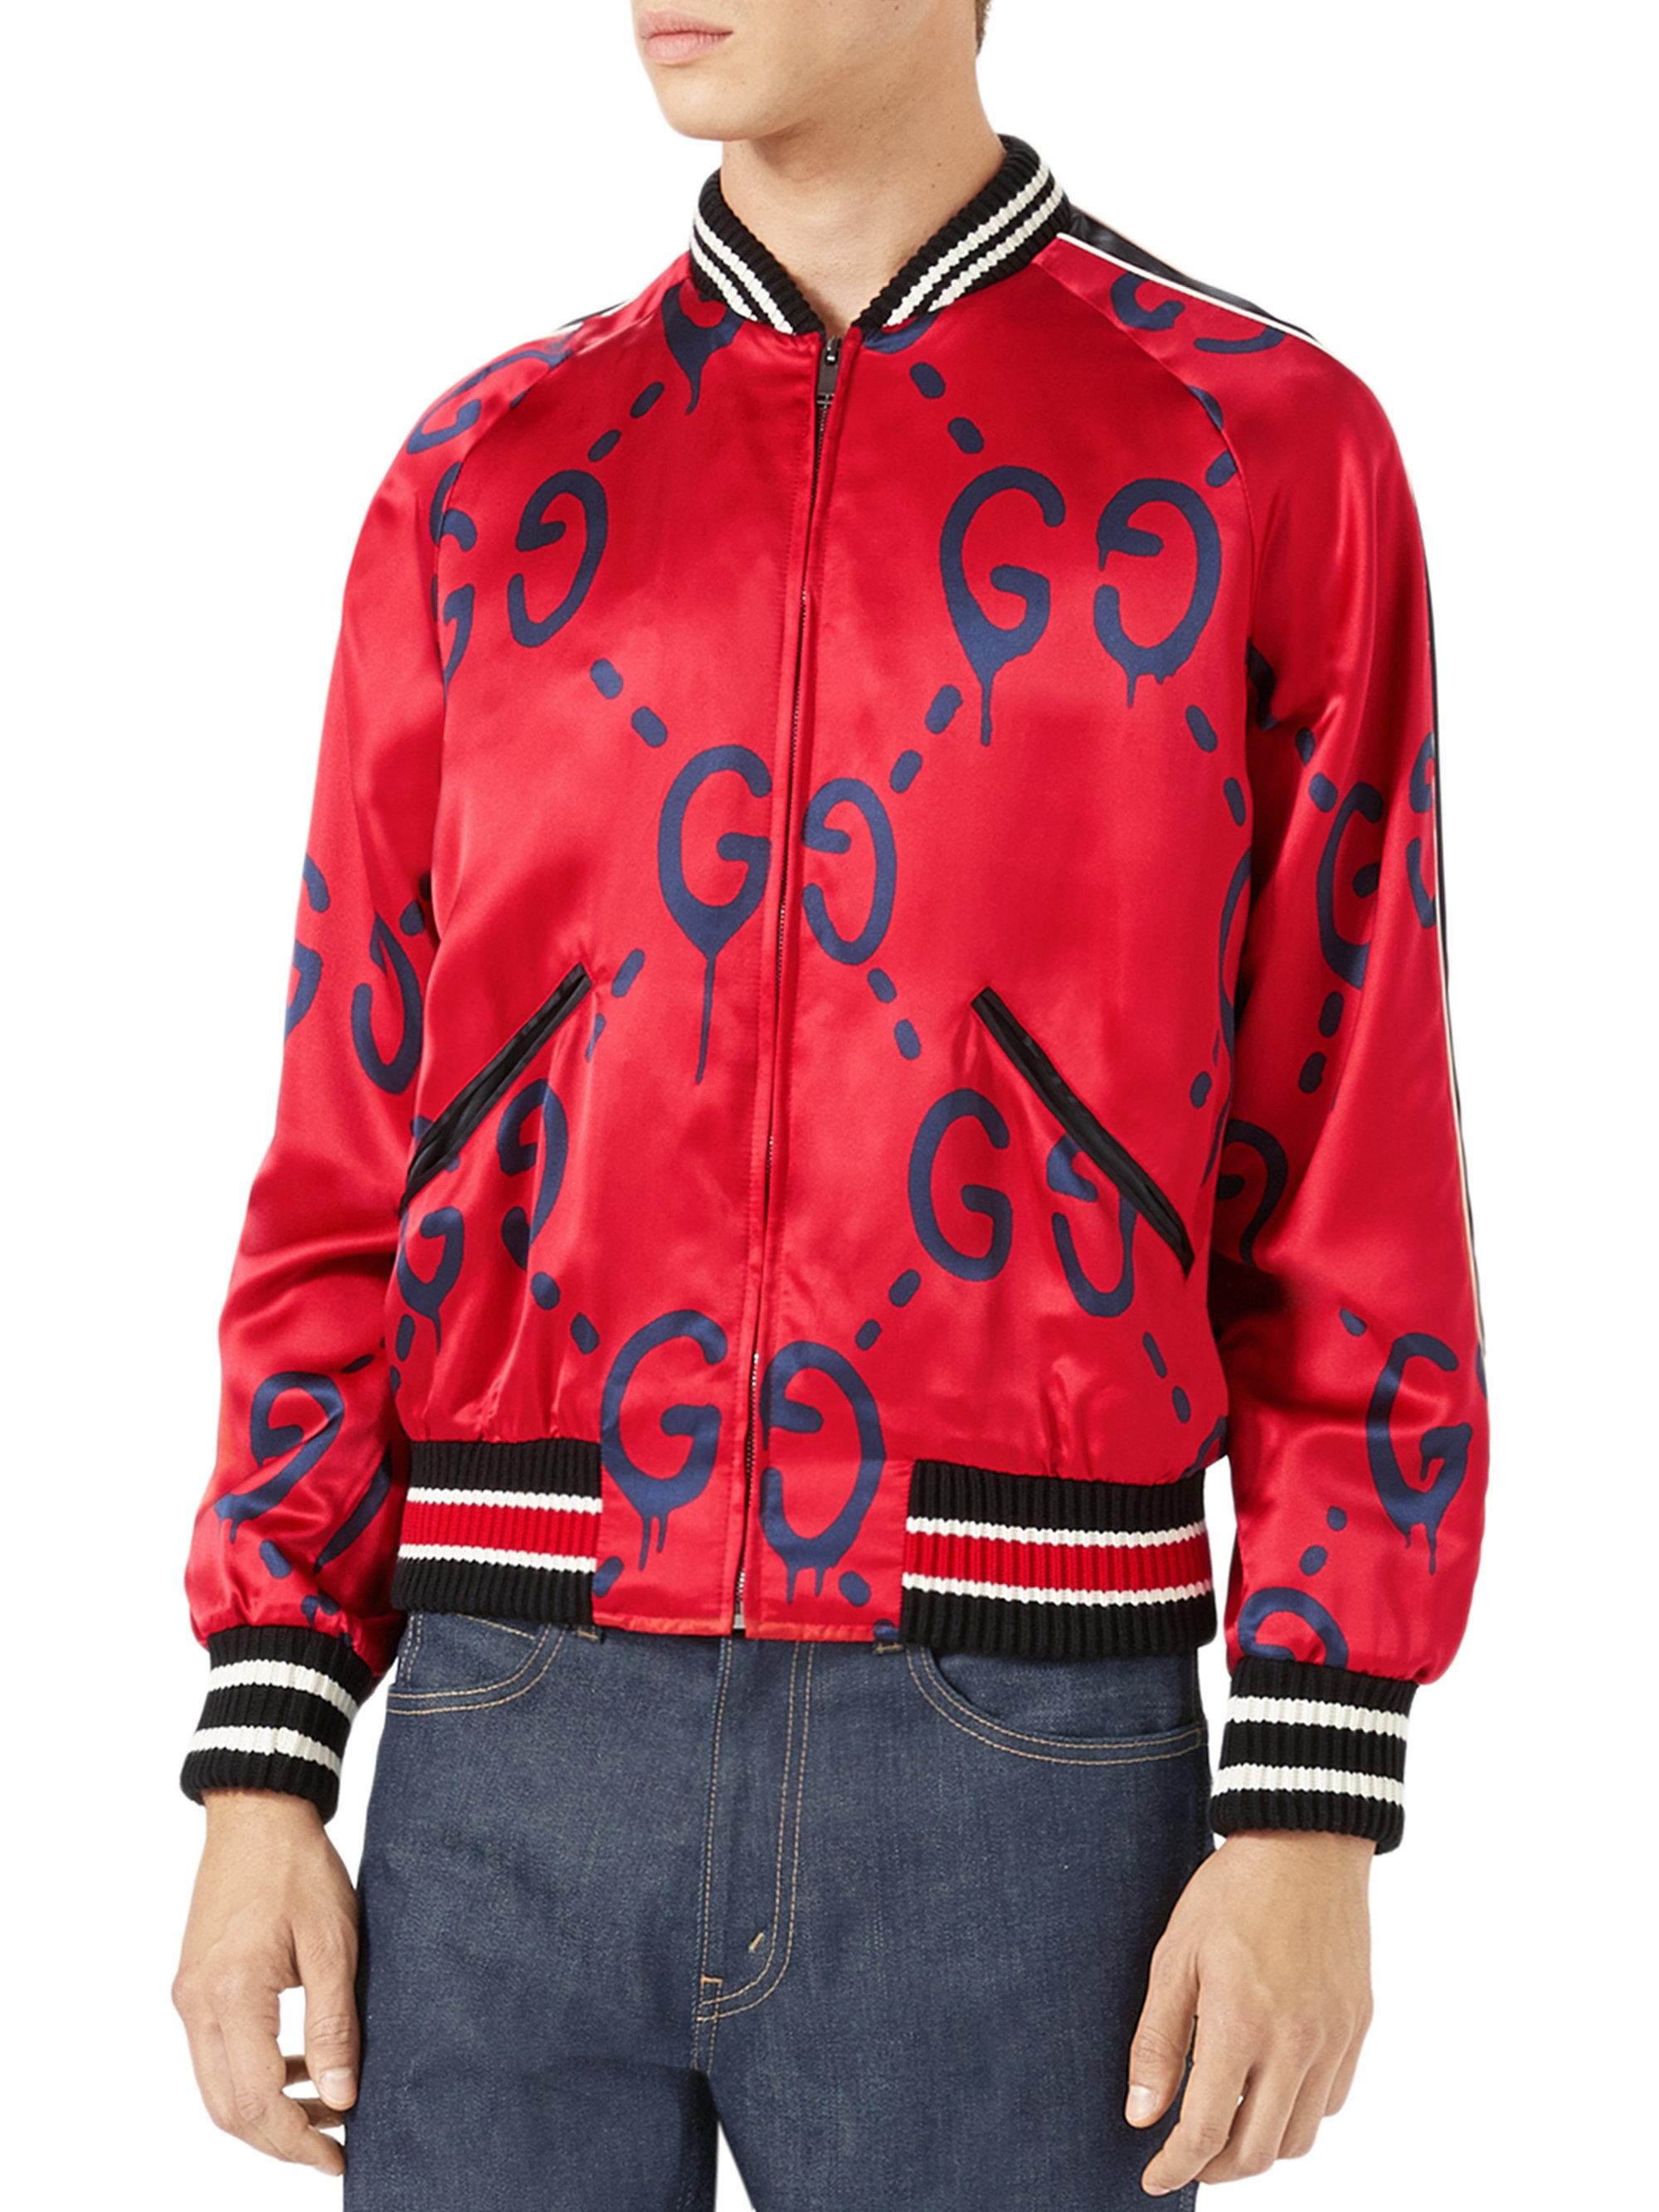 Lyst - Gucci Ghost Duchesse Bomber Jacket in Red for Men